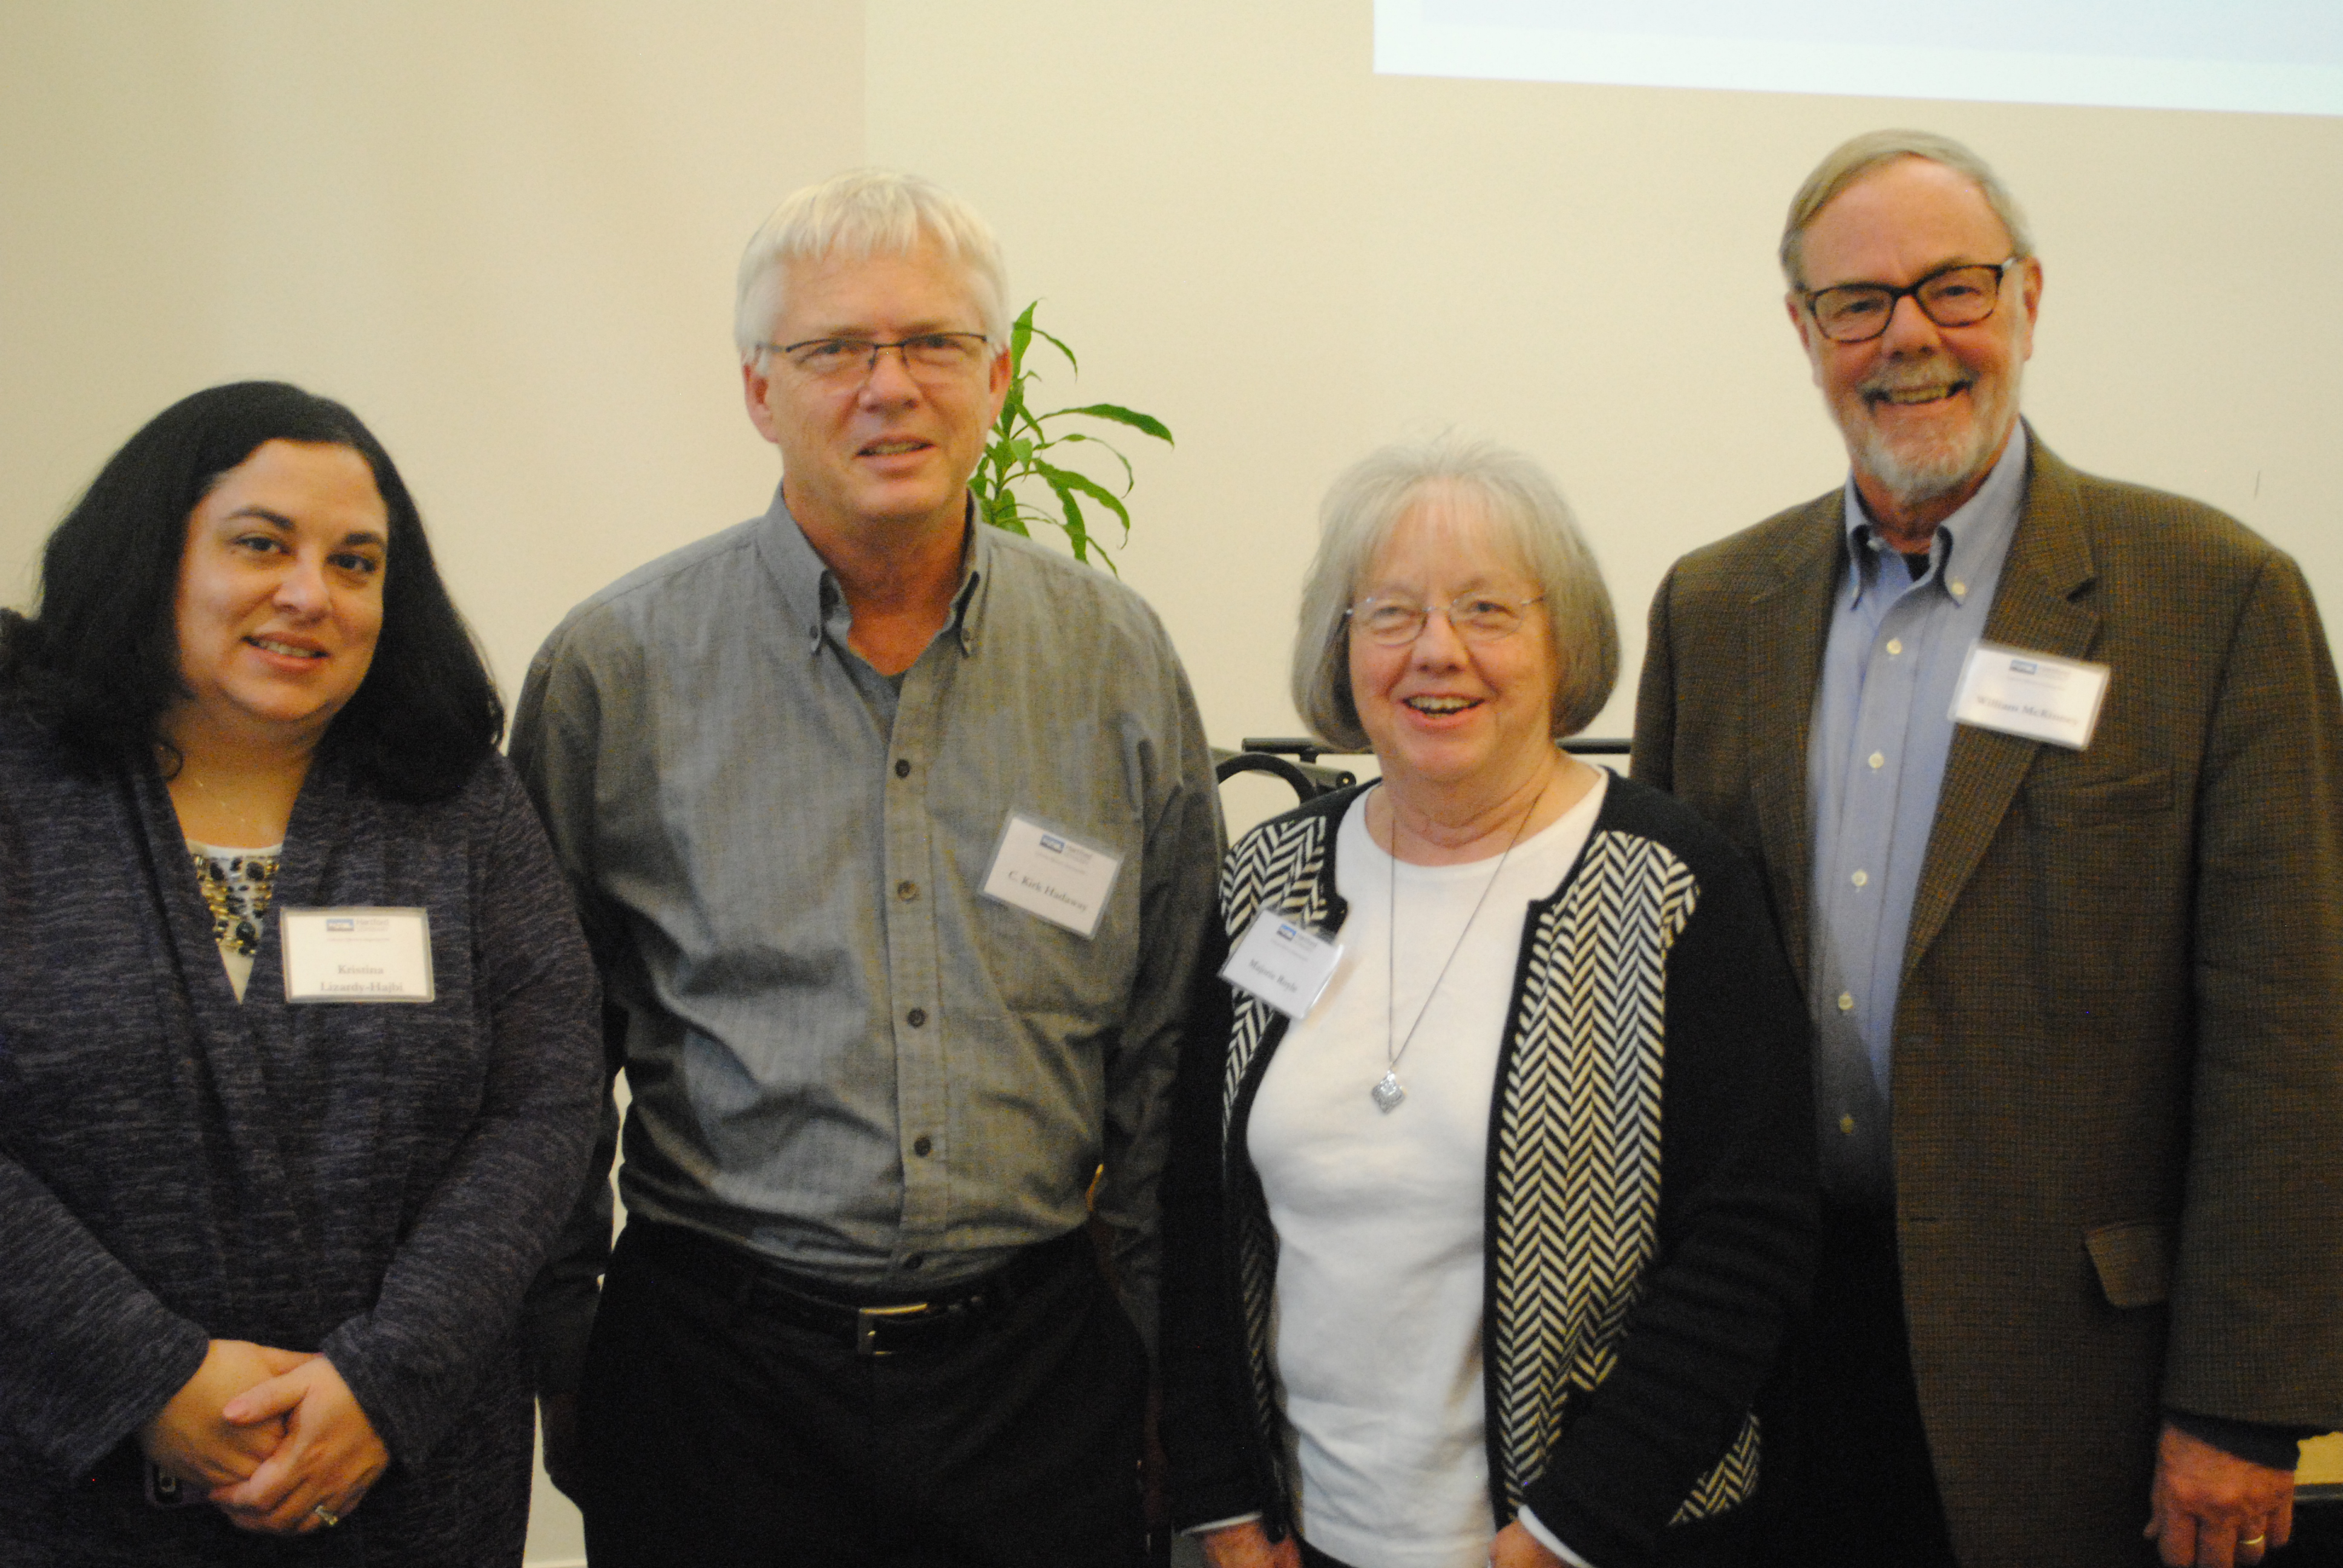 Past and present researchers for the United Church of Christ